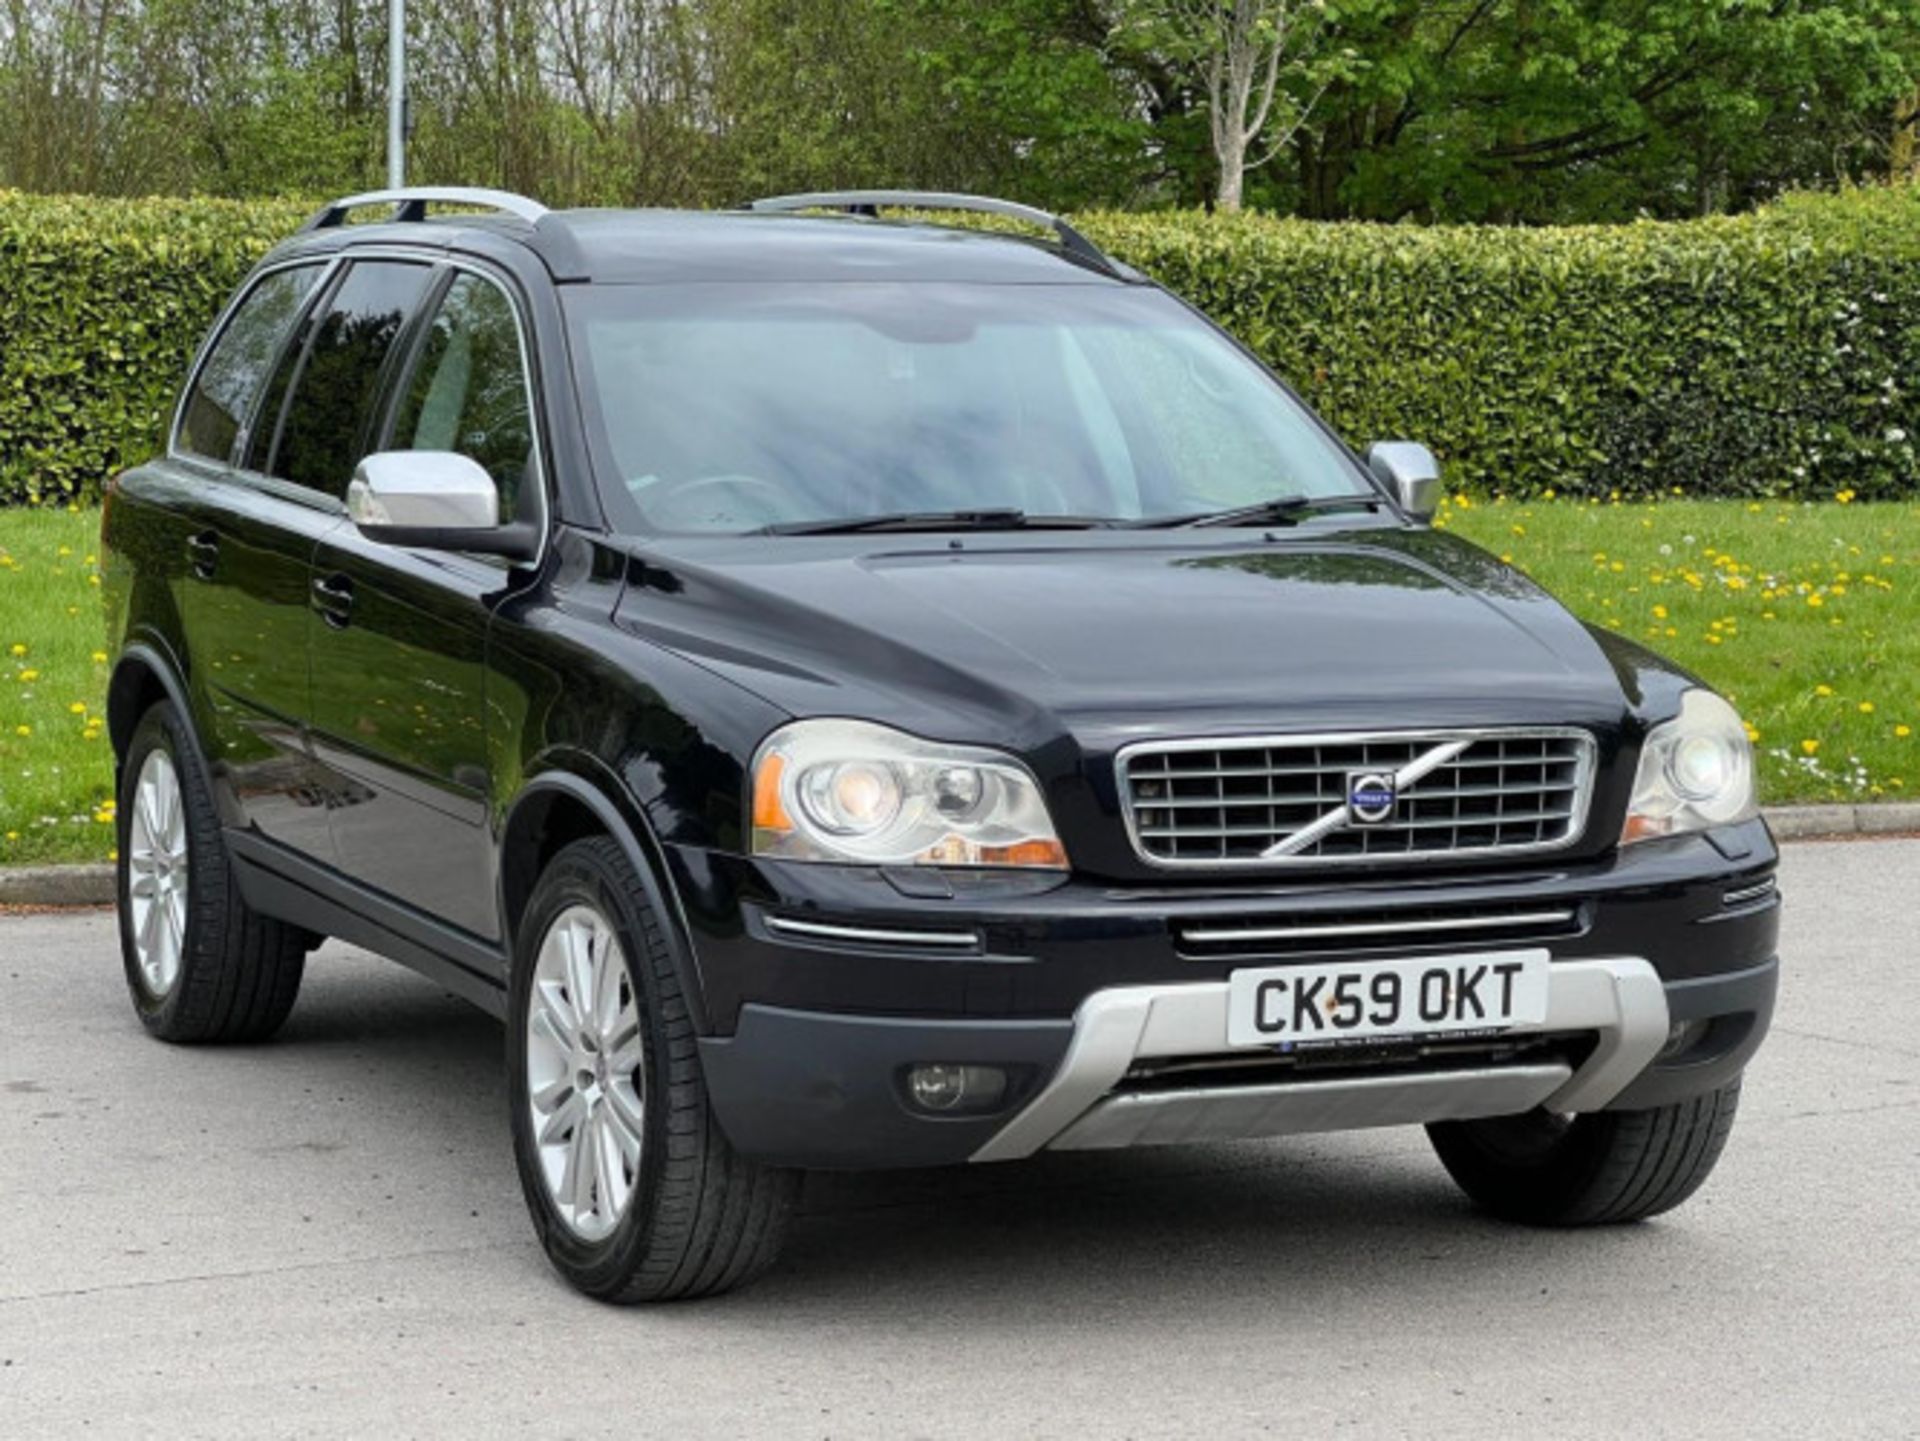 VOLVO XC90 2.4 D5 EXECUTIVE GEARTRONIC AWD, 5DR >>--NO VAT ON HAMMER--<< - Image 8 of 136